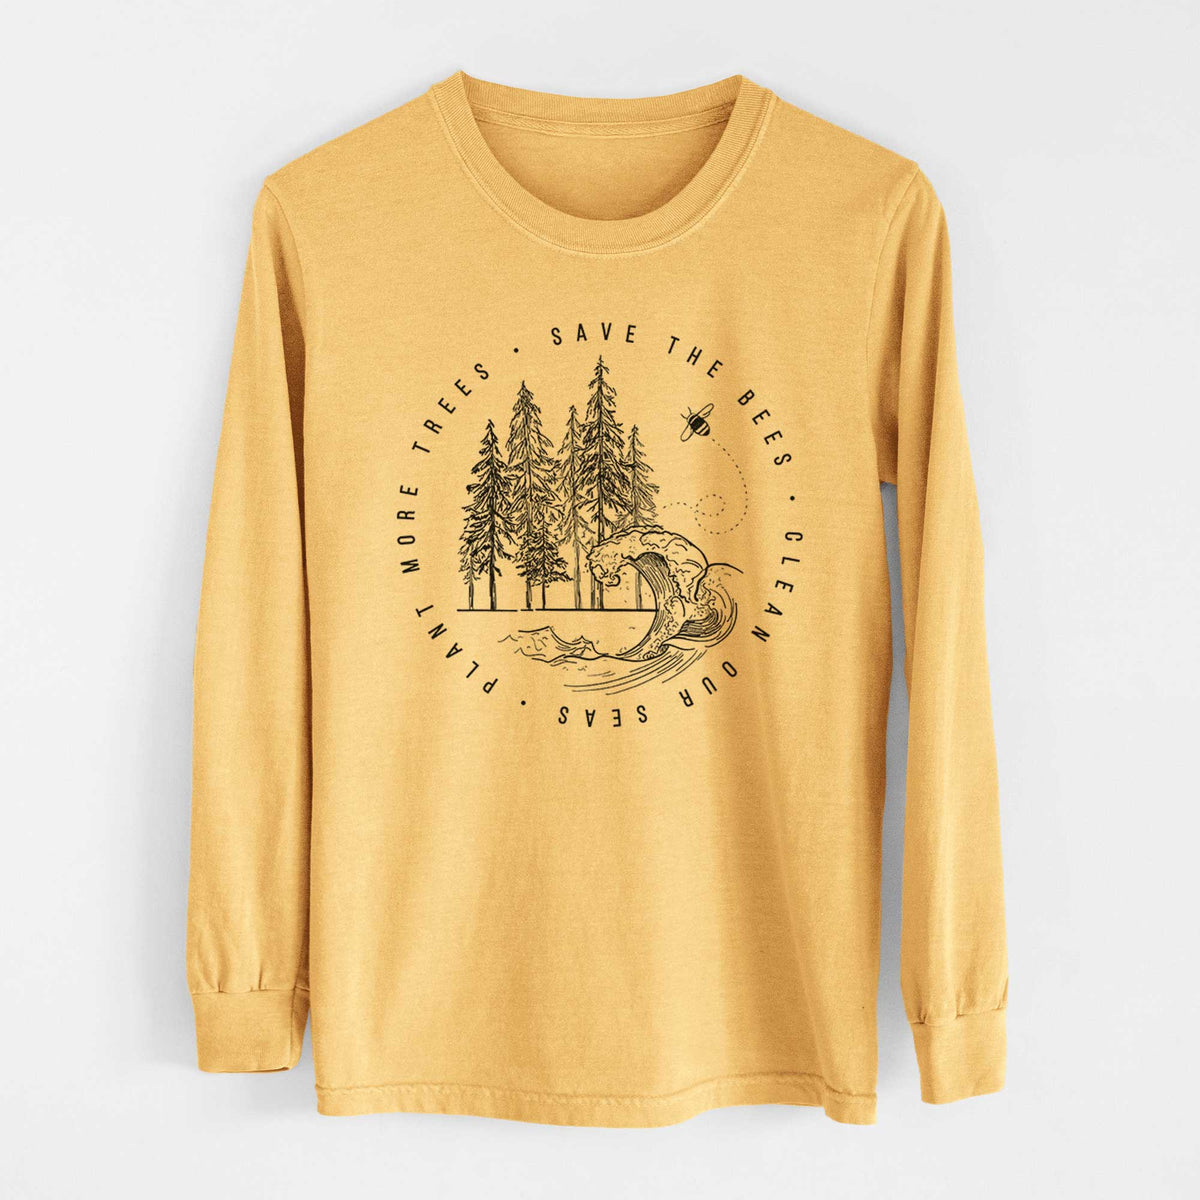 Save the Bees, Clean our Seas, Plant more Trees - Heavyweight 100% Cotton Long Sleeve